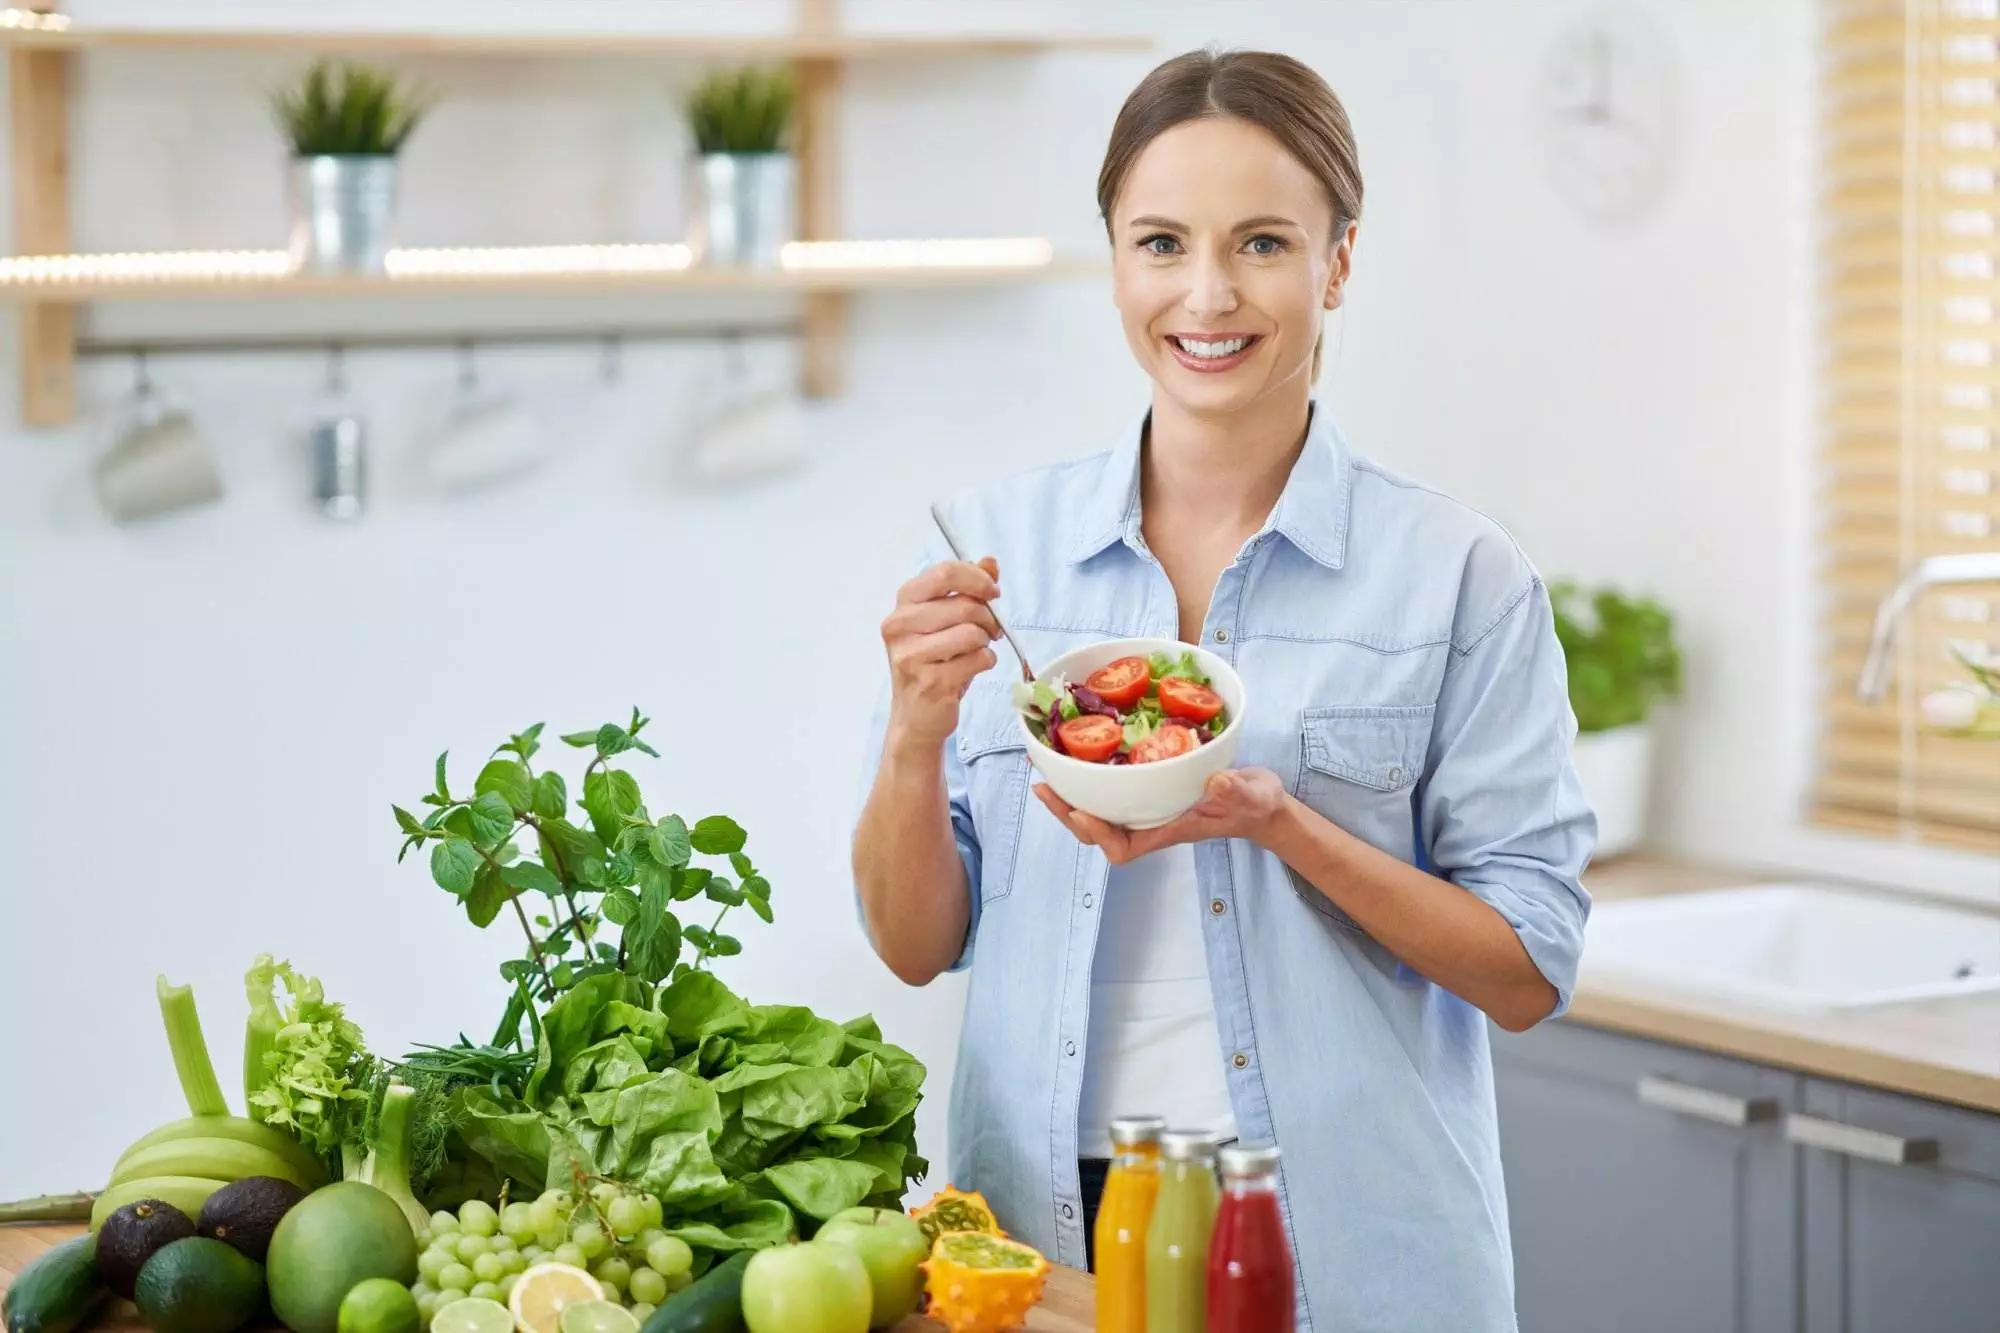 Woman holding fresh vegetable salad in kitchen.